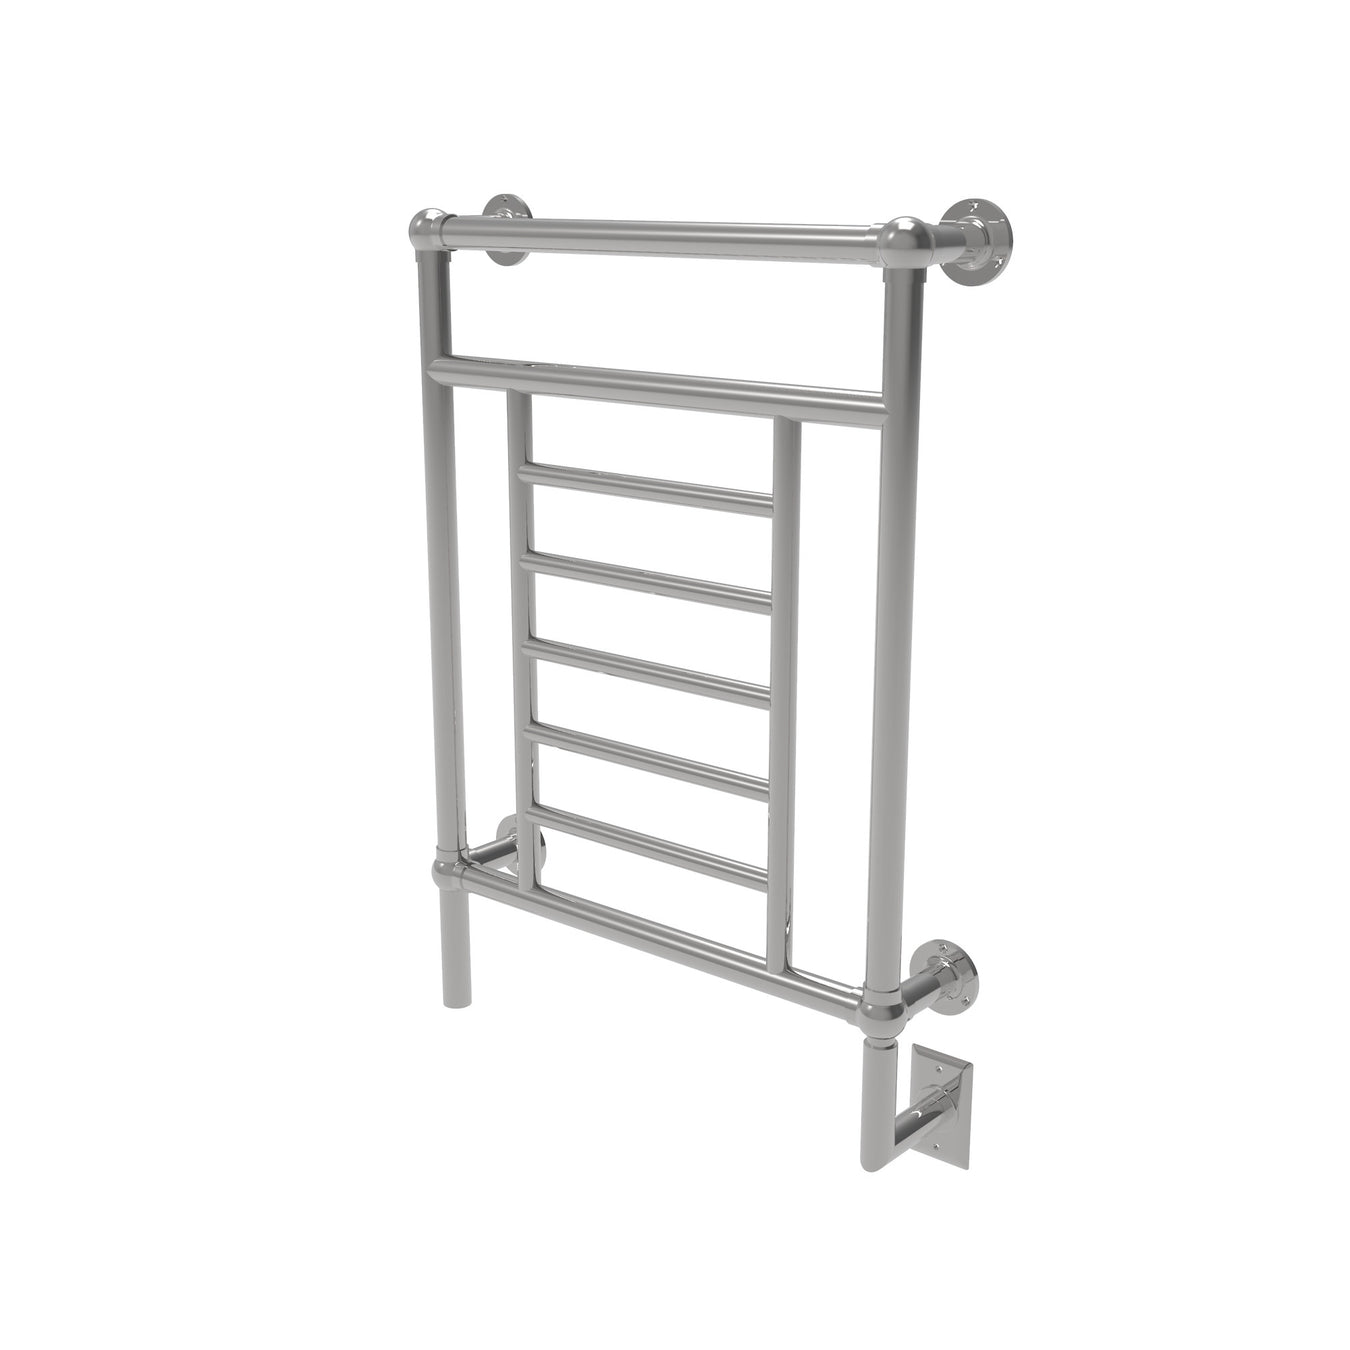 Amba Products Traditional Collection T-2536 Towel Warmers